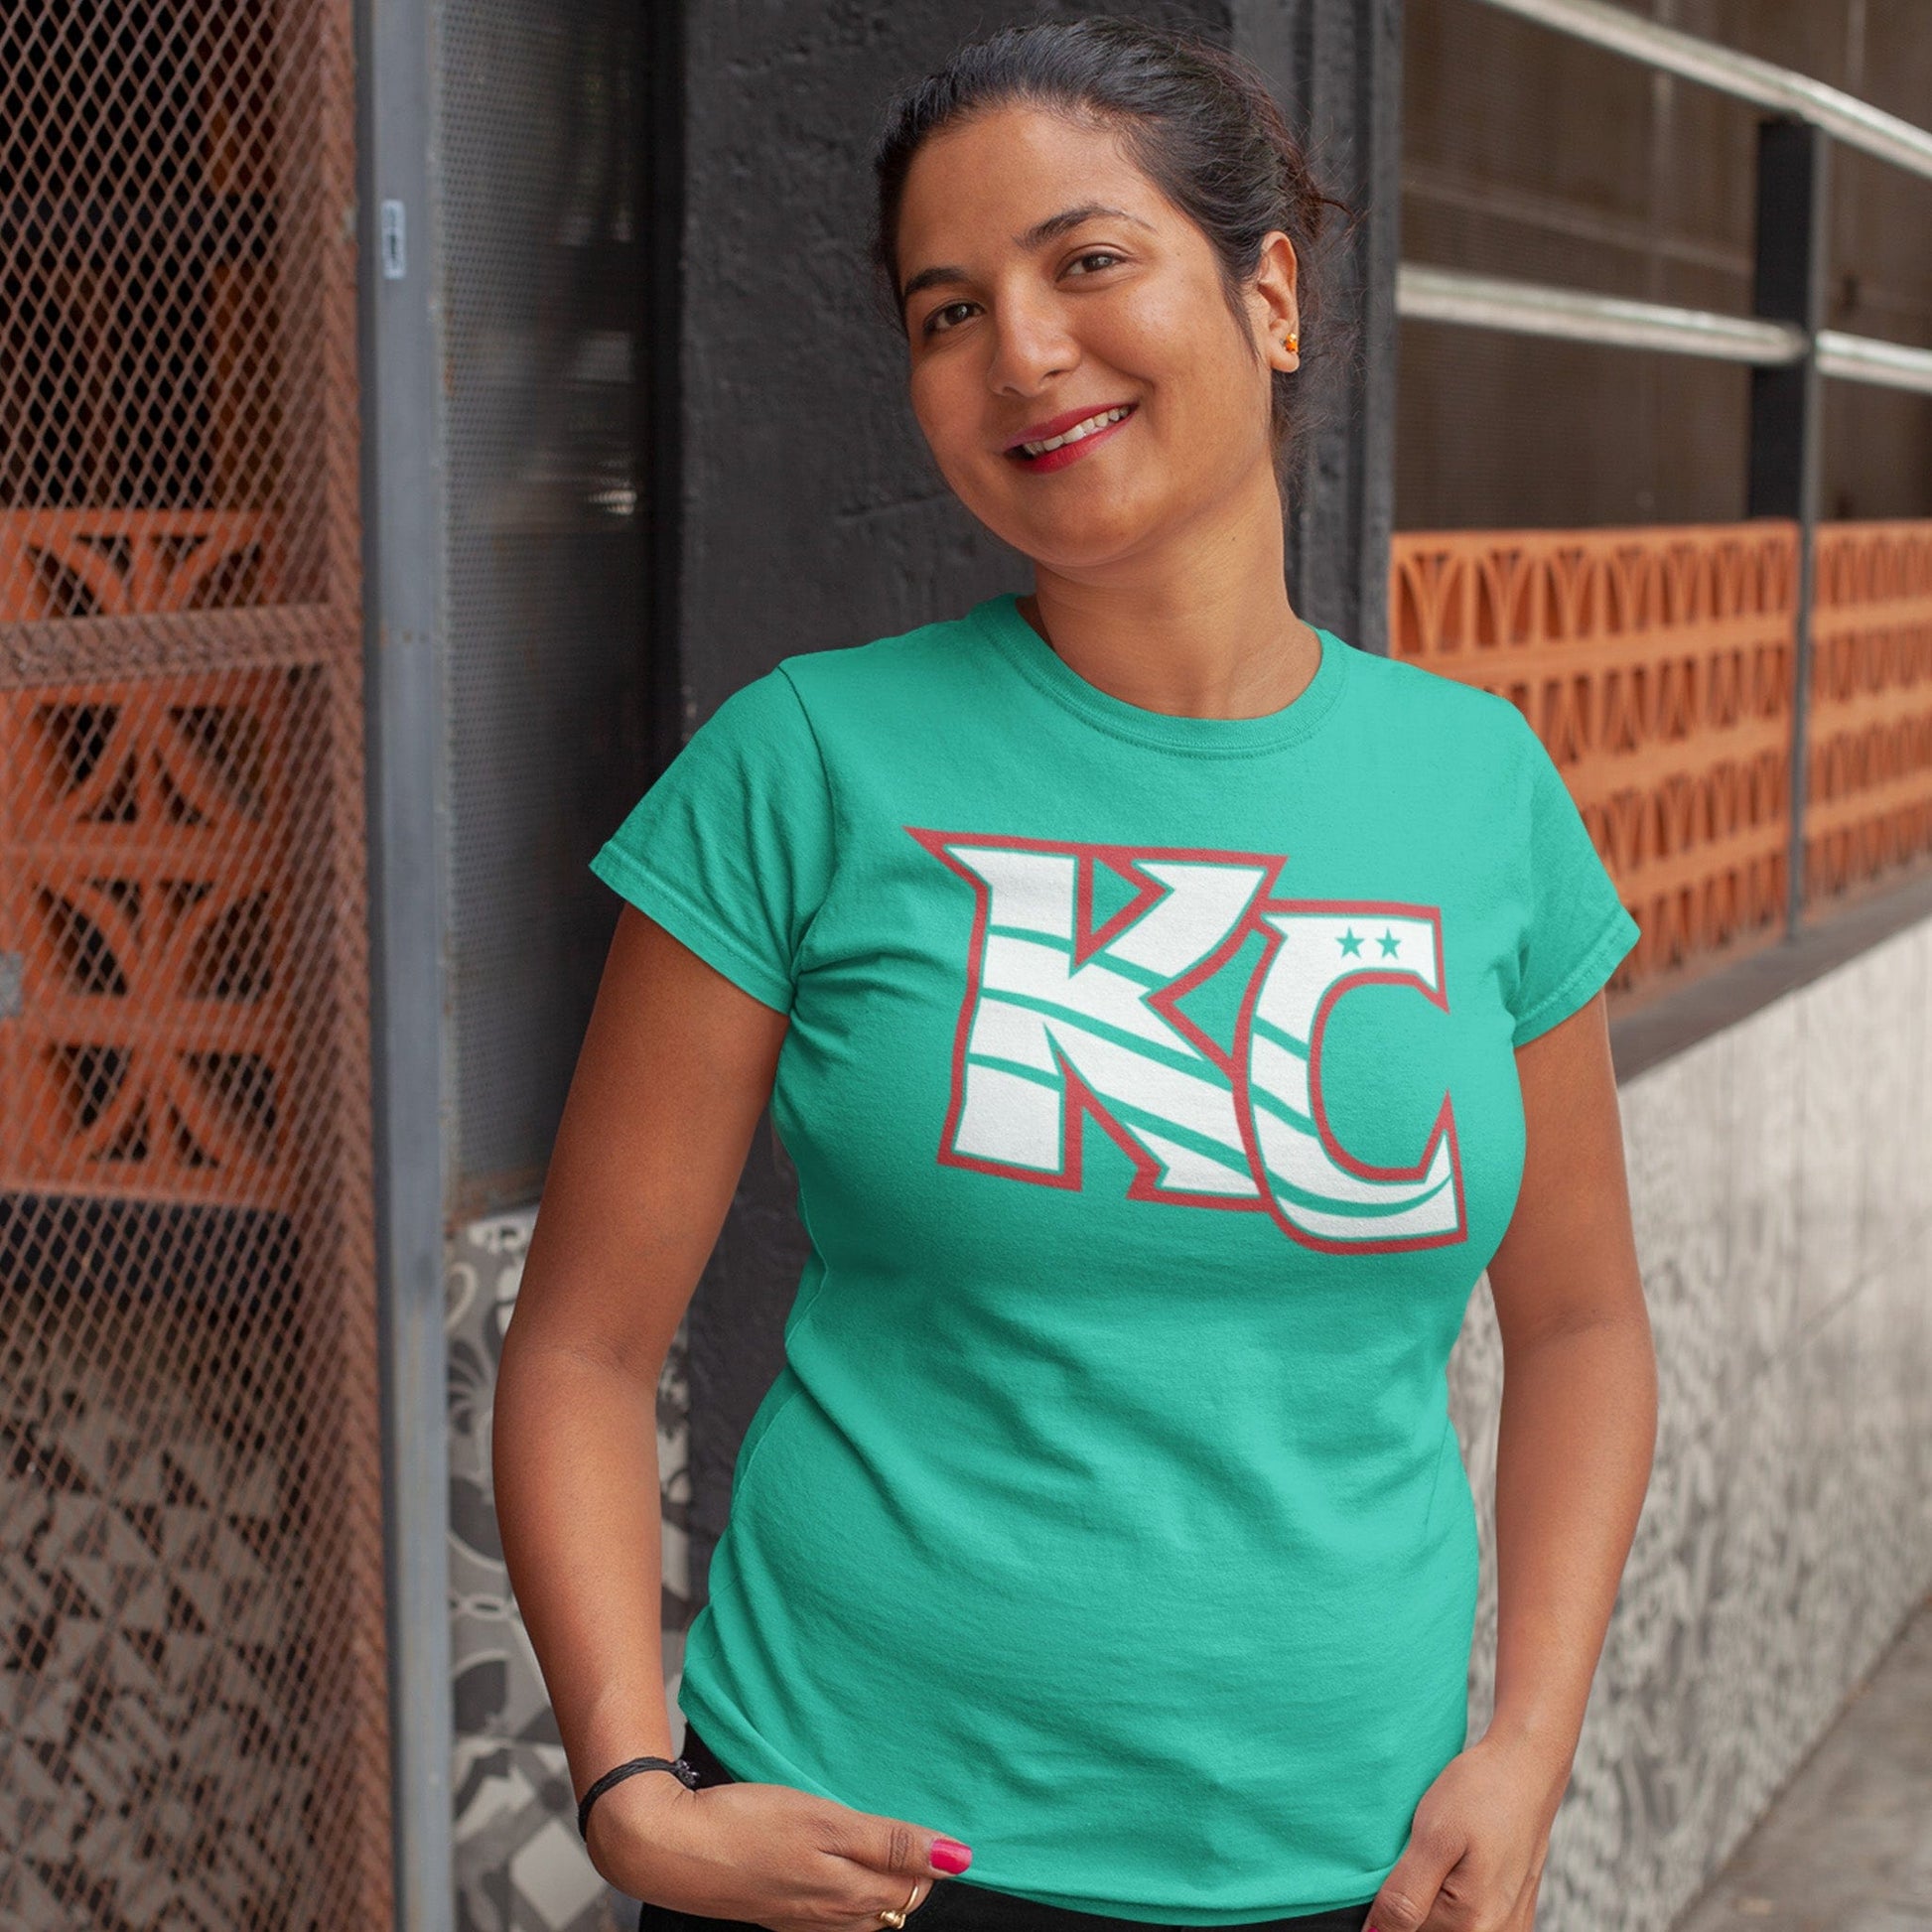 KC Swag Kansas City Current CURRENT KC on teal unisex t-shirt worn by female model standing outside downtown building